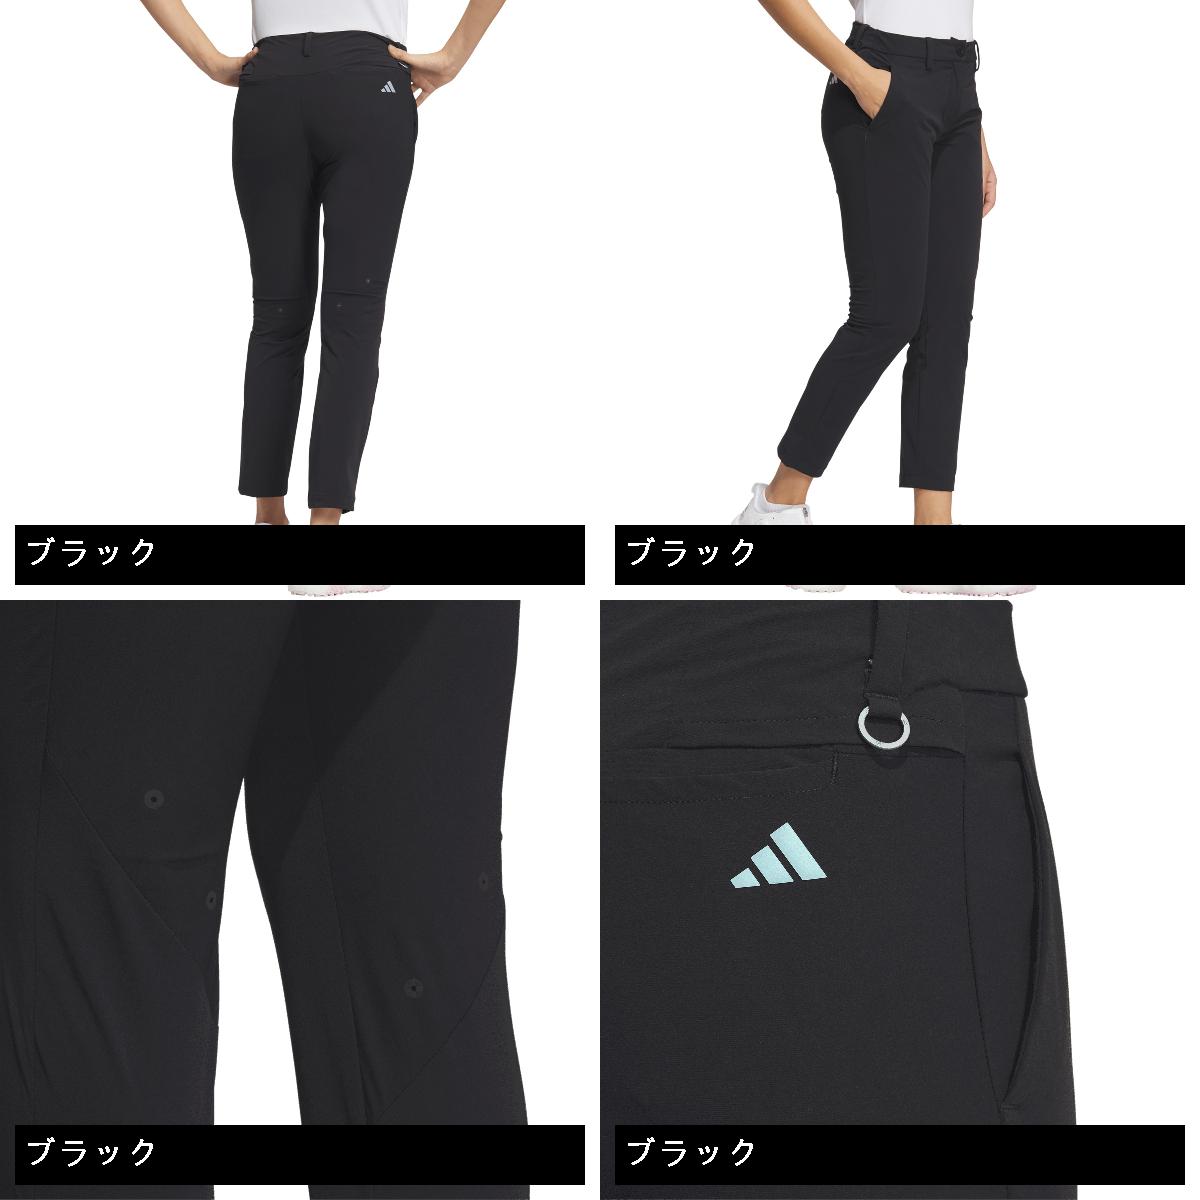  Adidas Adidas EX stretch ACTIVE summer ventilation ankle pants Lady's 